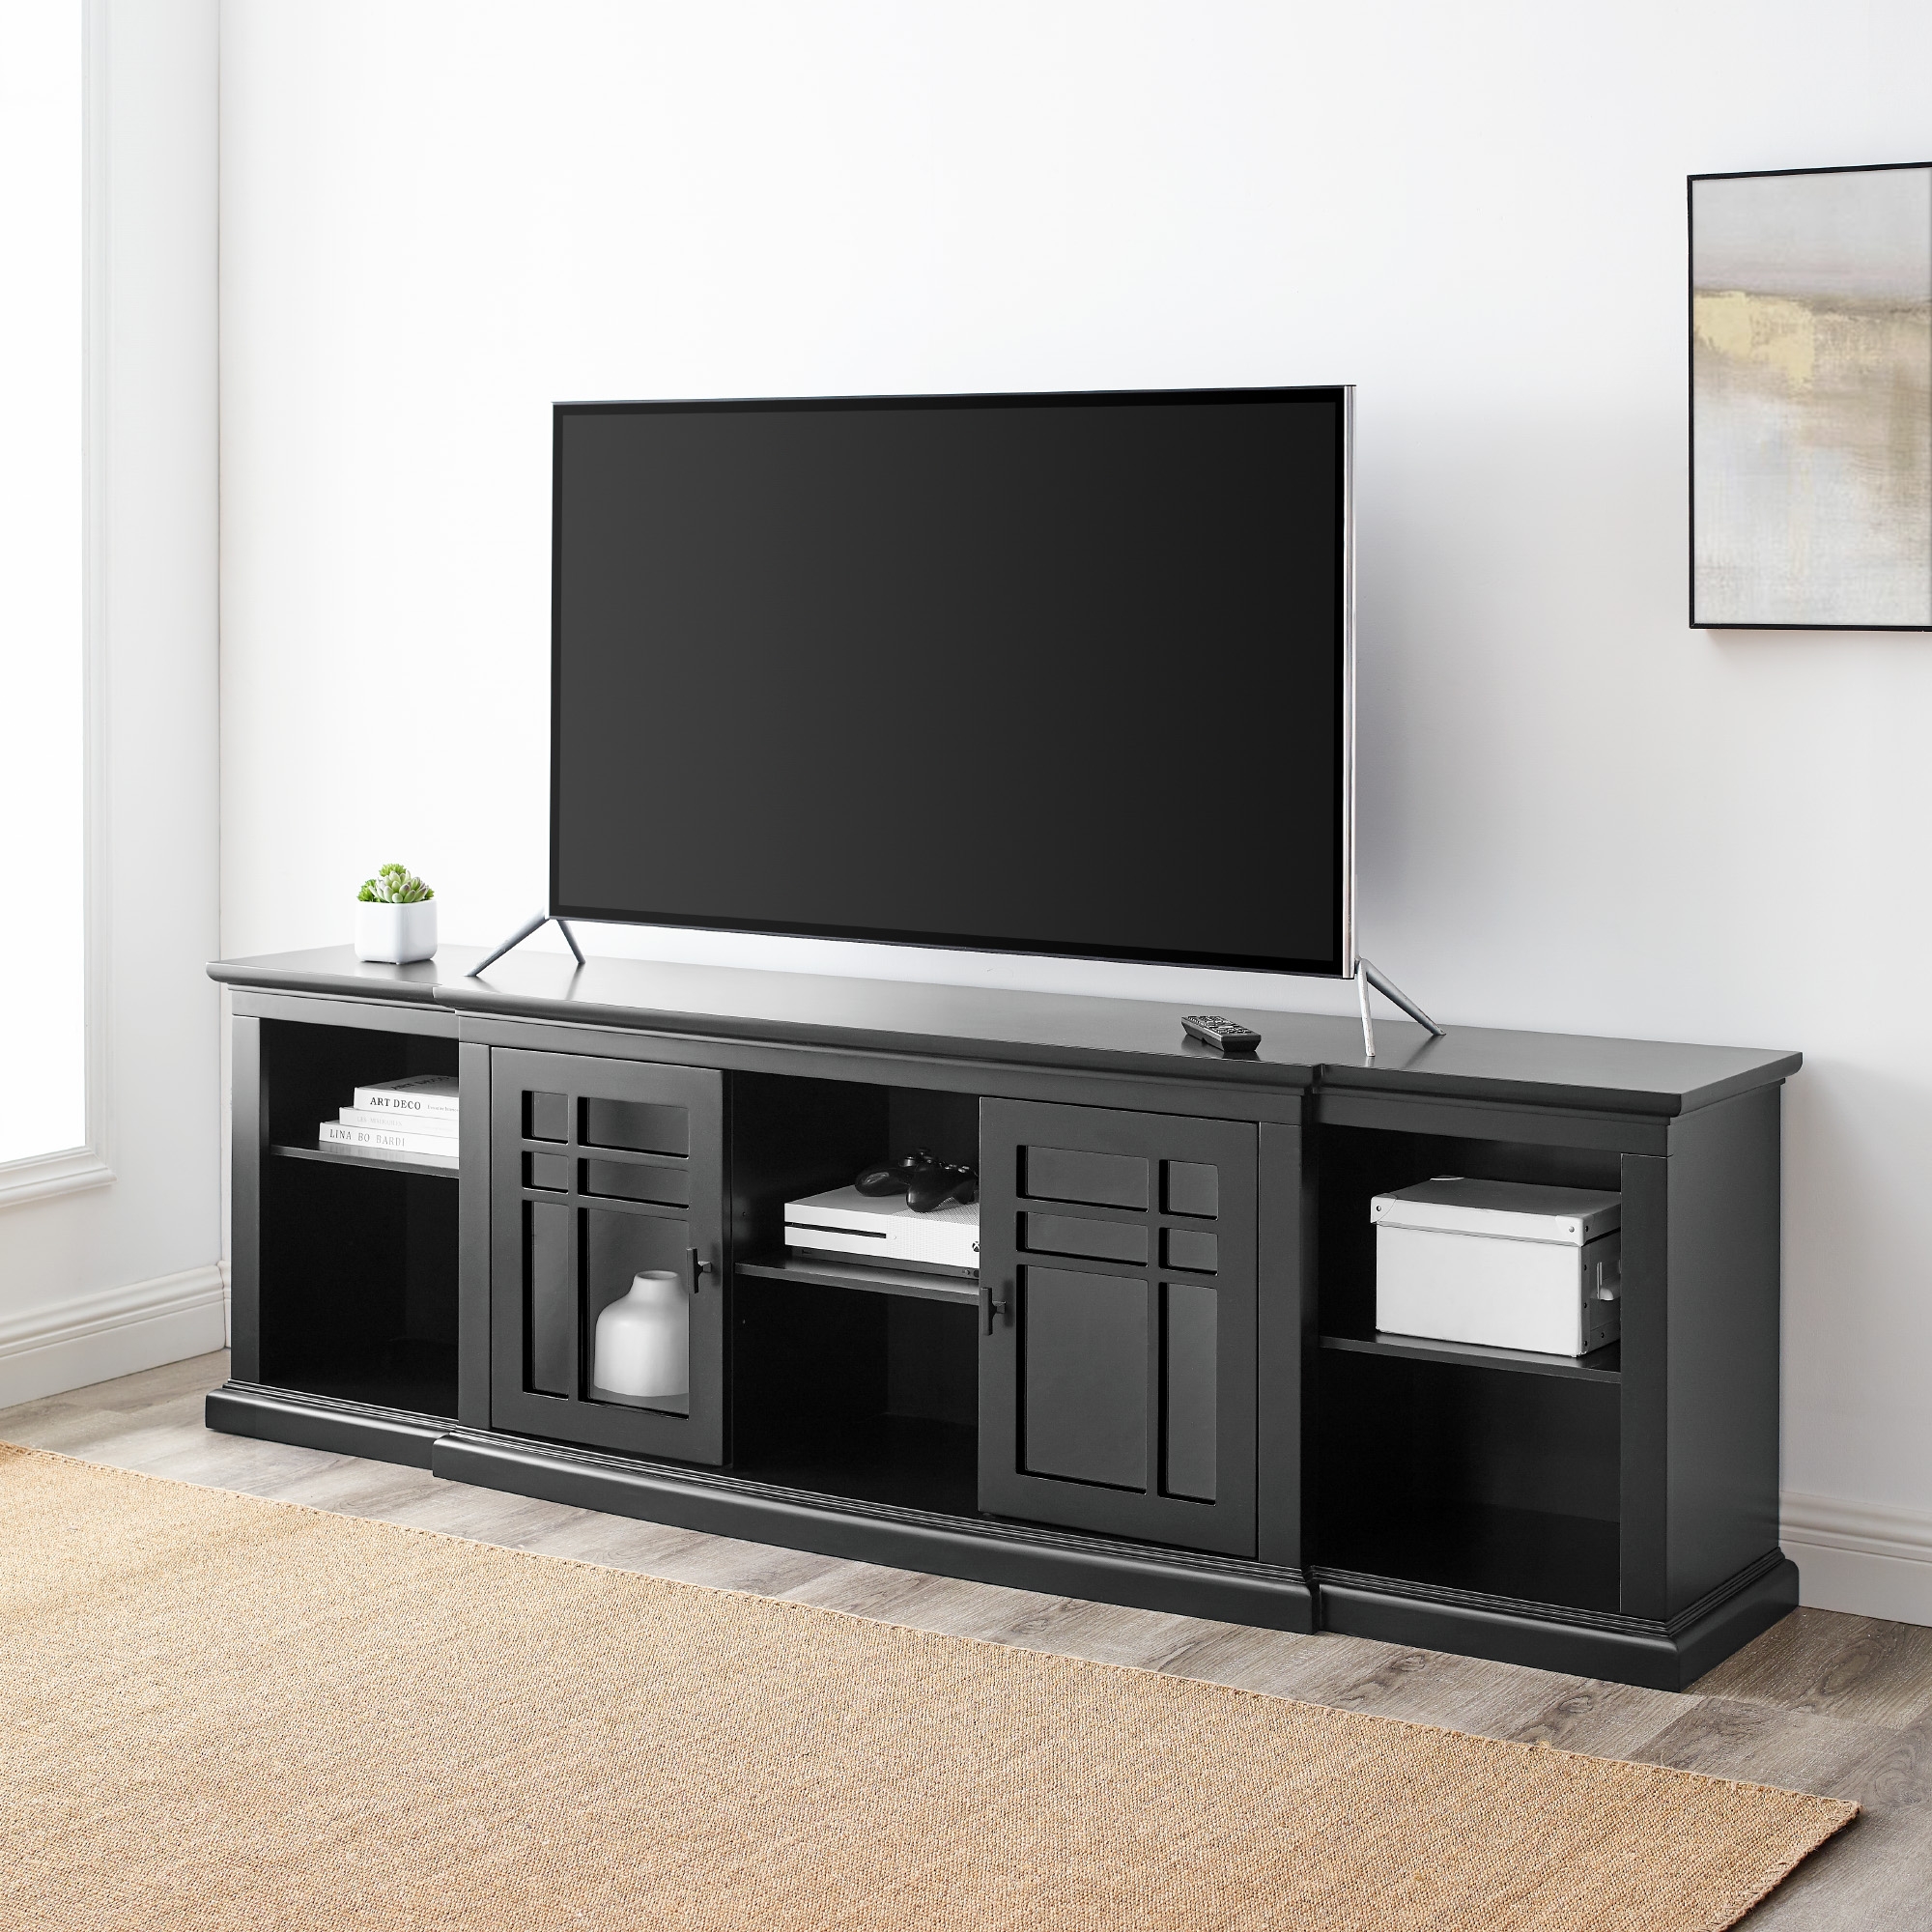 Classic Detailed Glass-Door Storage TV Stand for TVs up to 88” – Black - Image 4